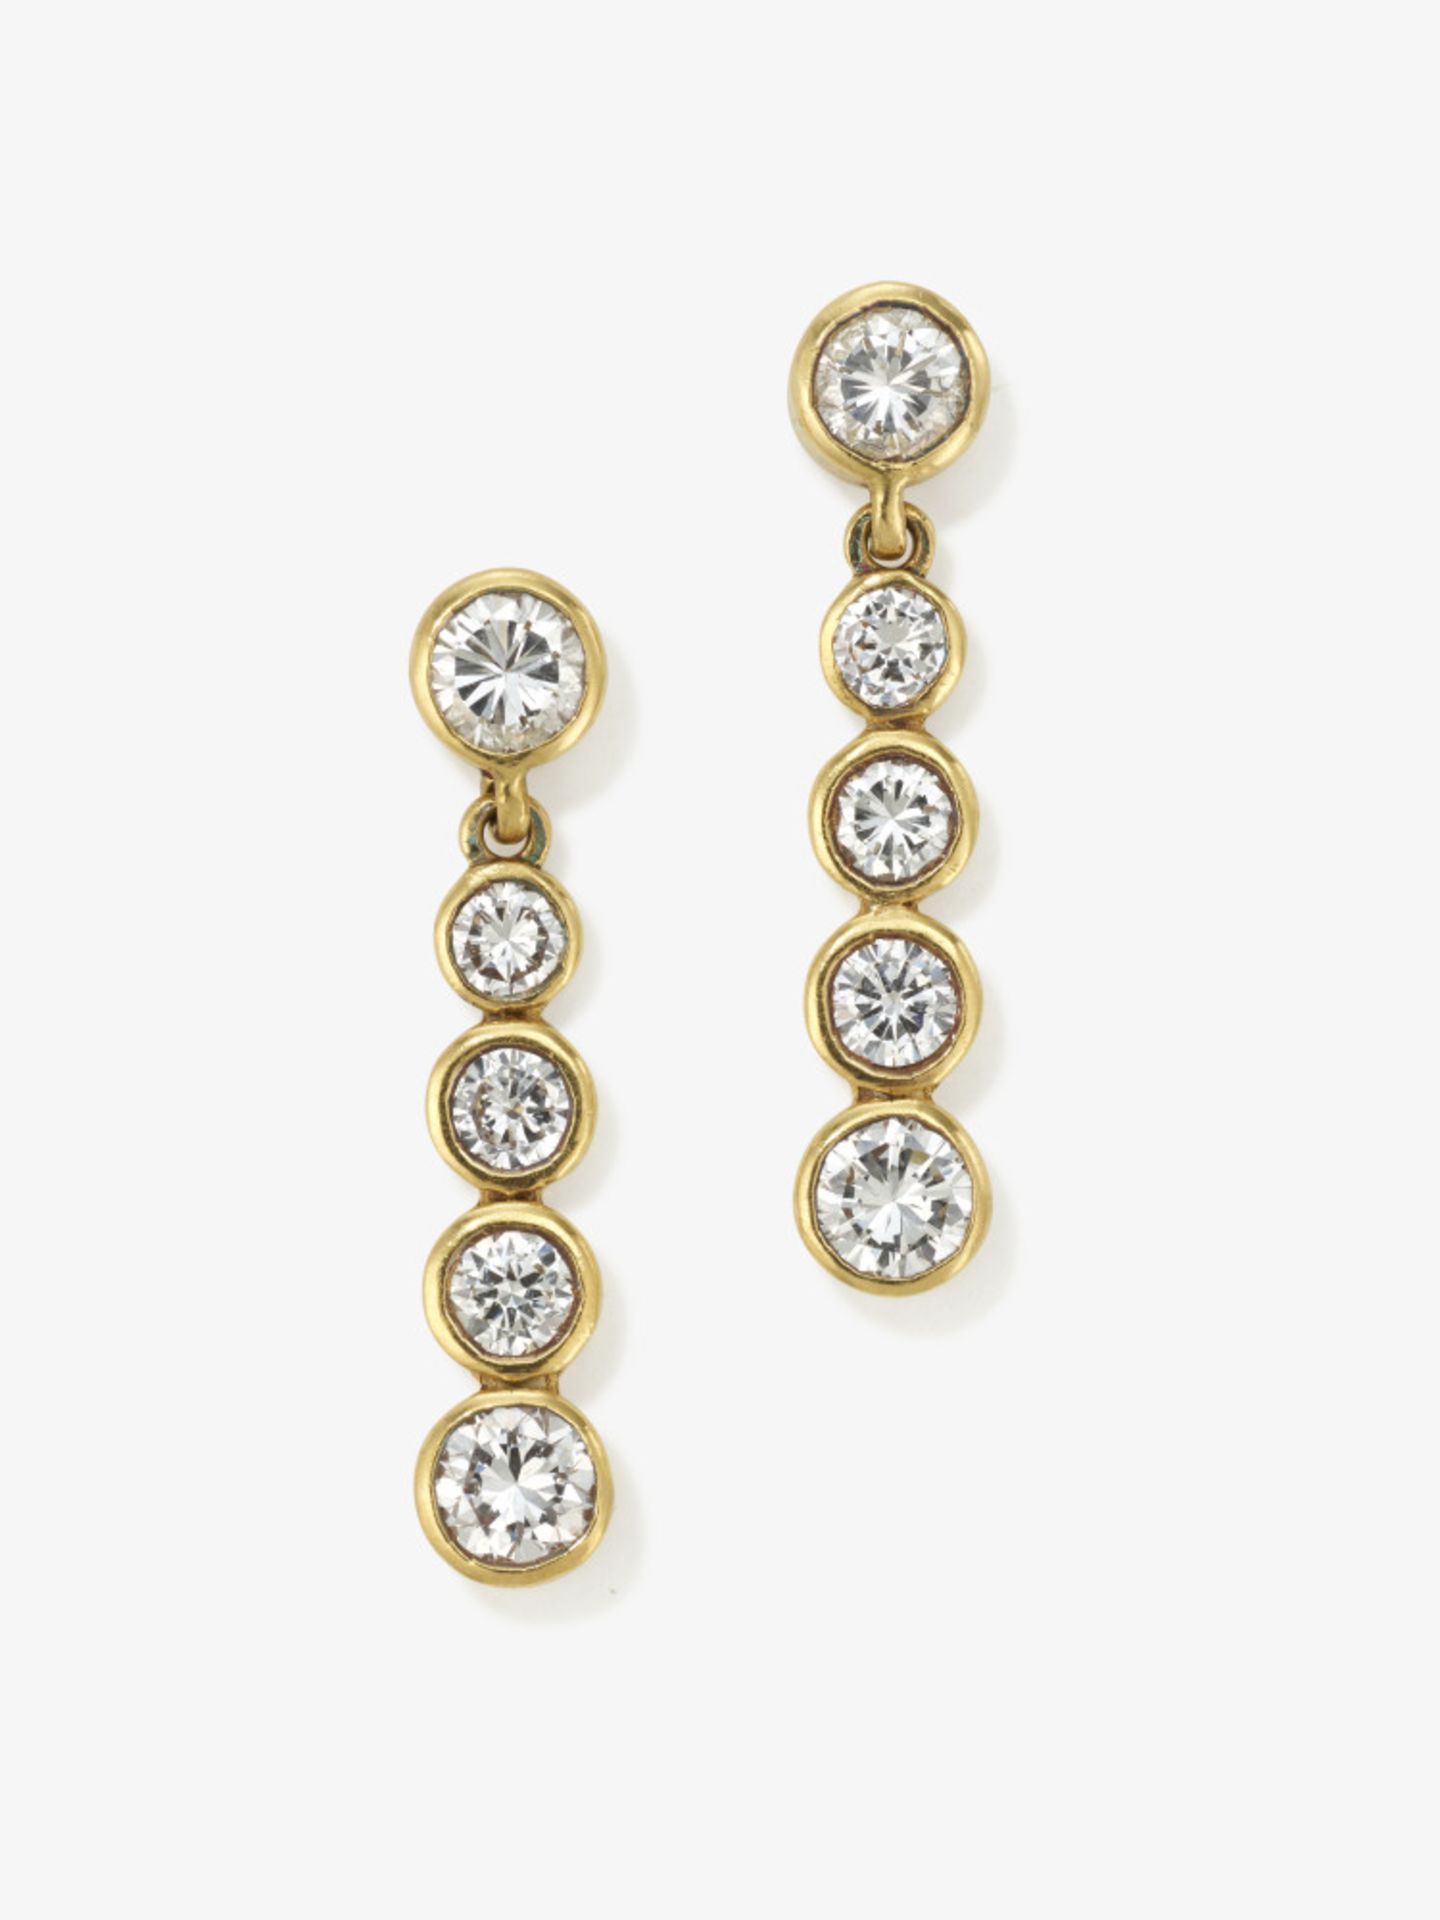 A pair of stud earrings decorated with brilliant-cut diamonds - Germany, 1980s - 1990s